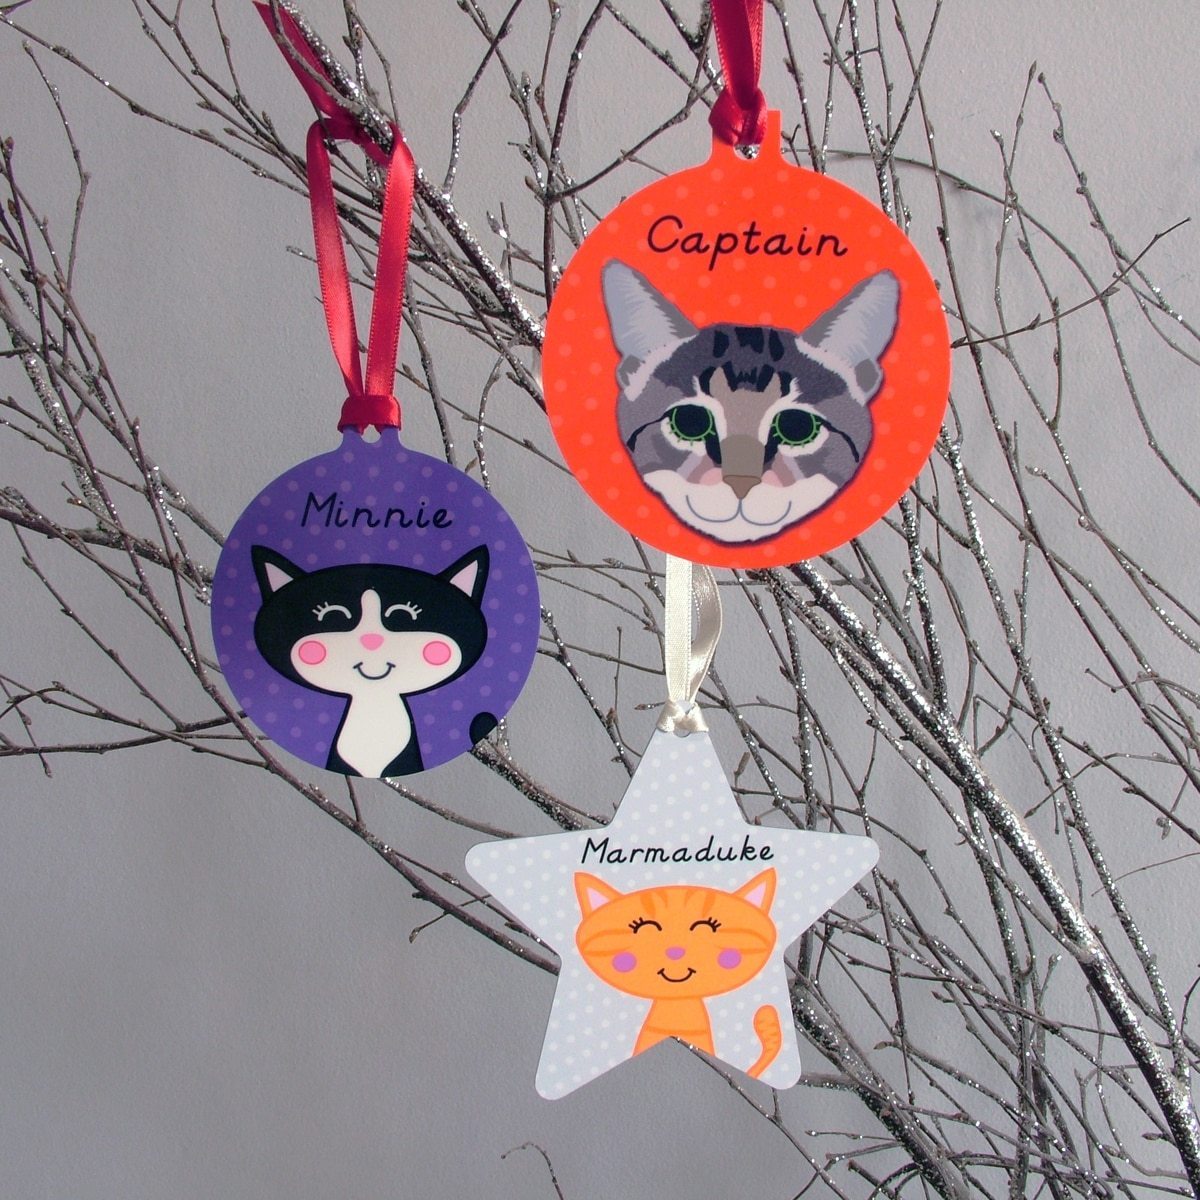 Personalised Cat Christmas Tree Decoration  - Hoobynoo - Personalised Pet Tags and Gifts